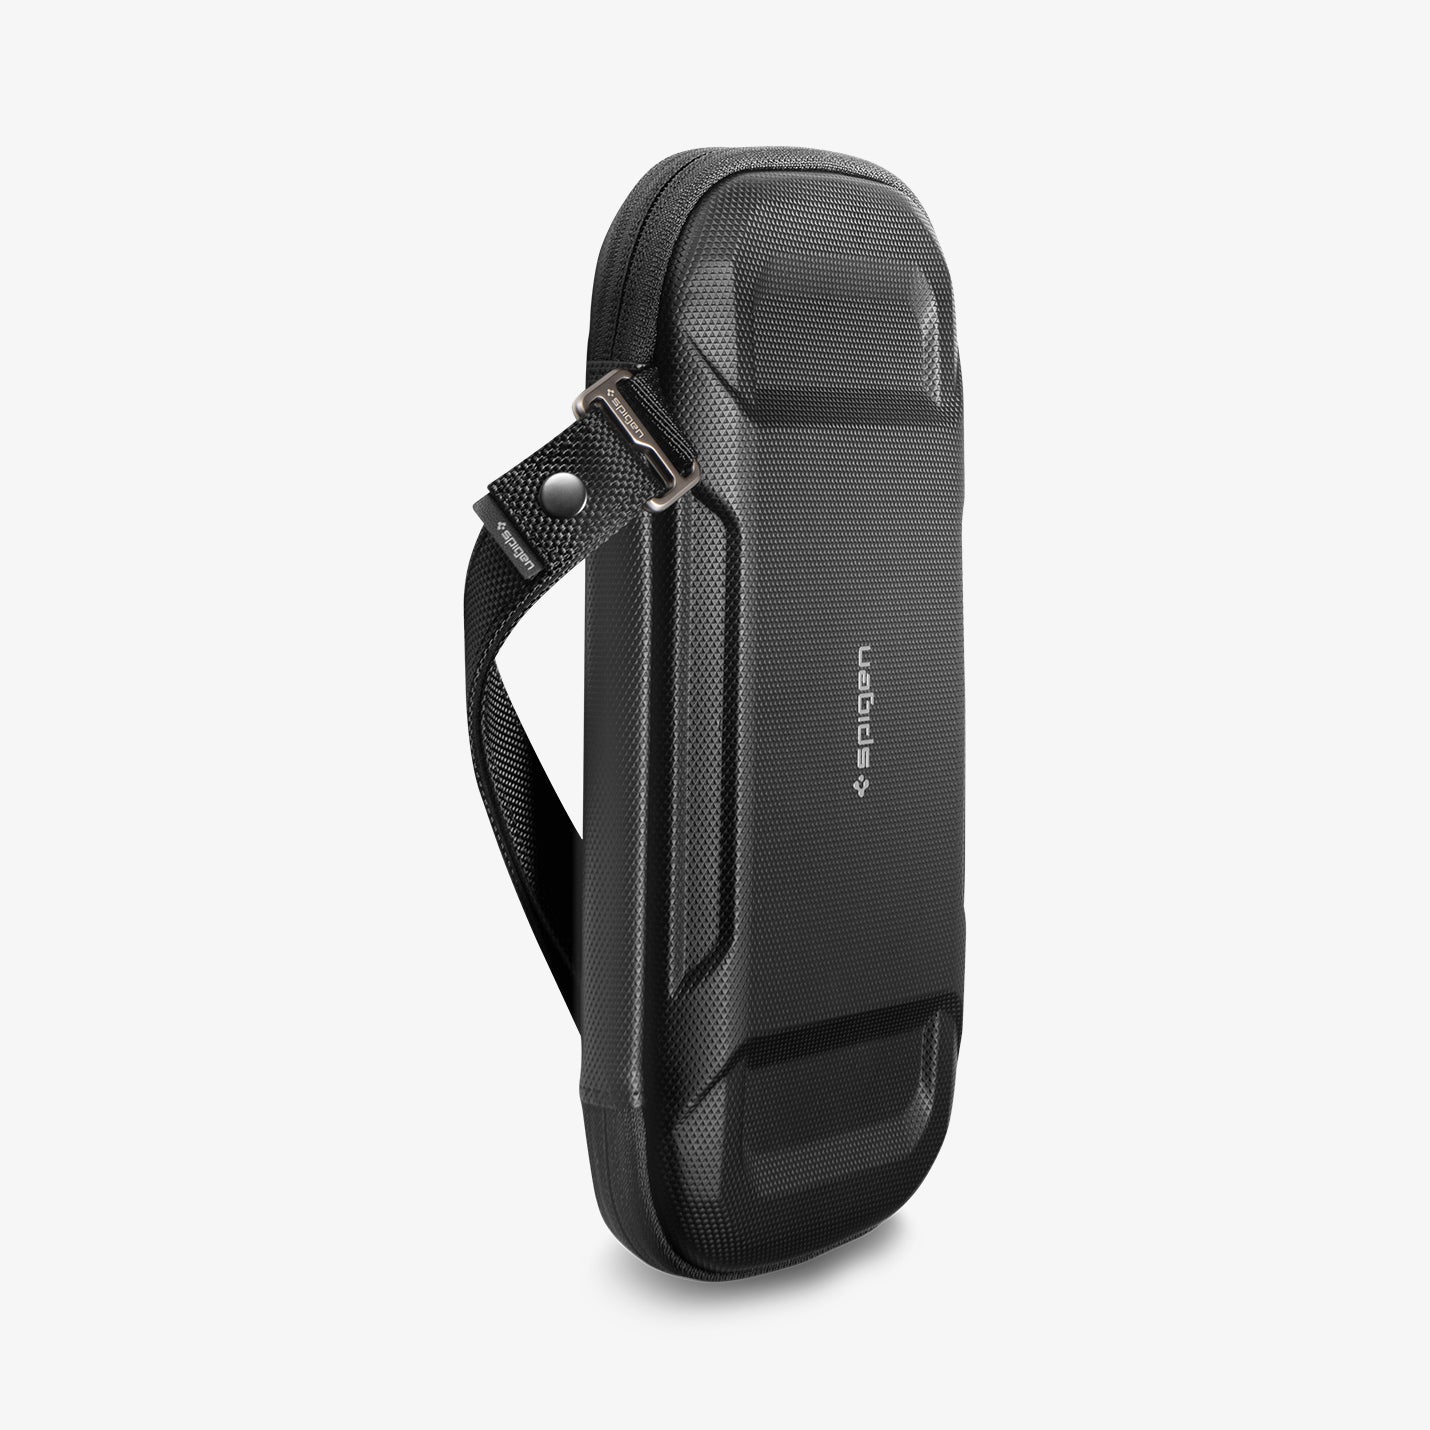 AFA05509 - Rugged Armor® Pro Slim Cable Organizer Bag in black showing the front and top with strap